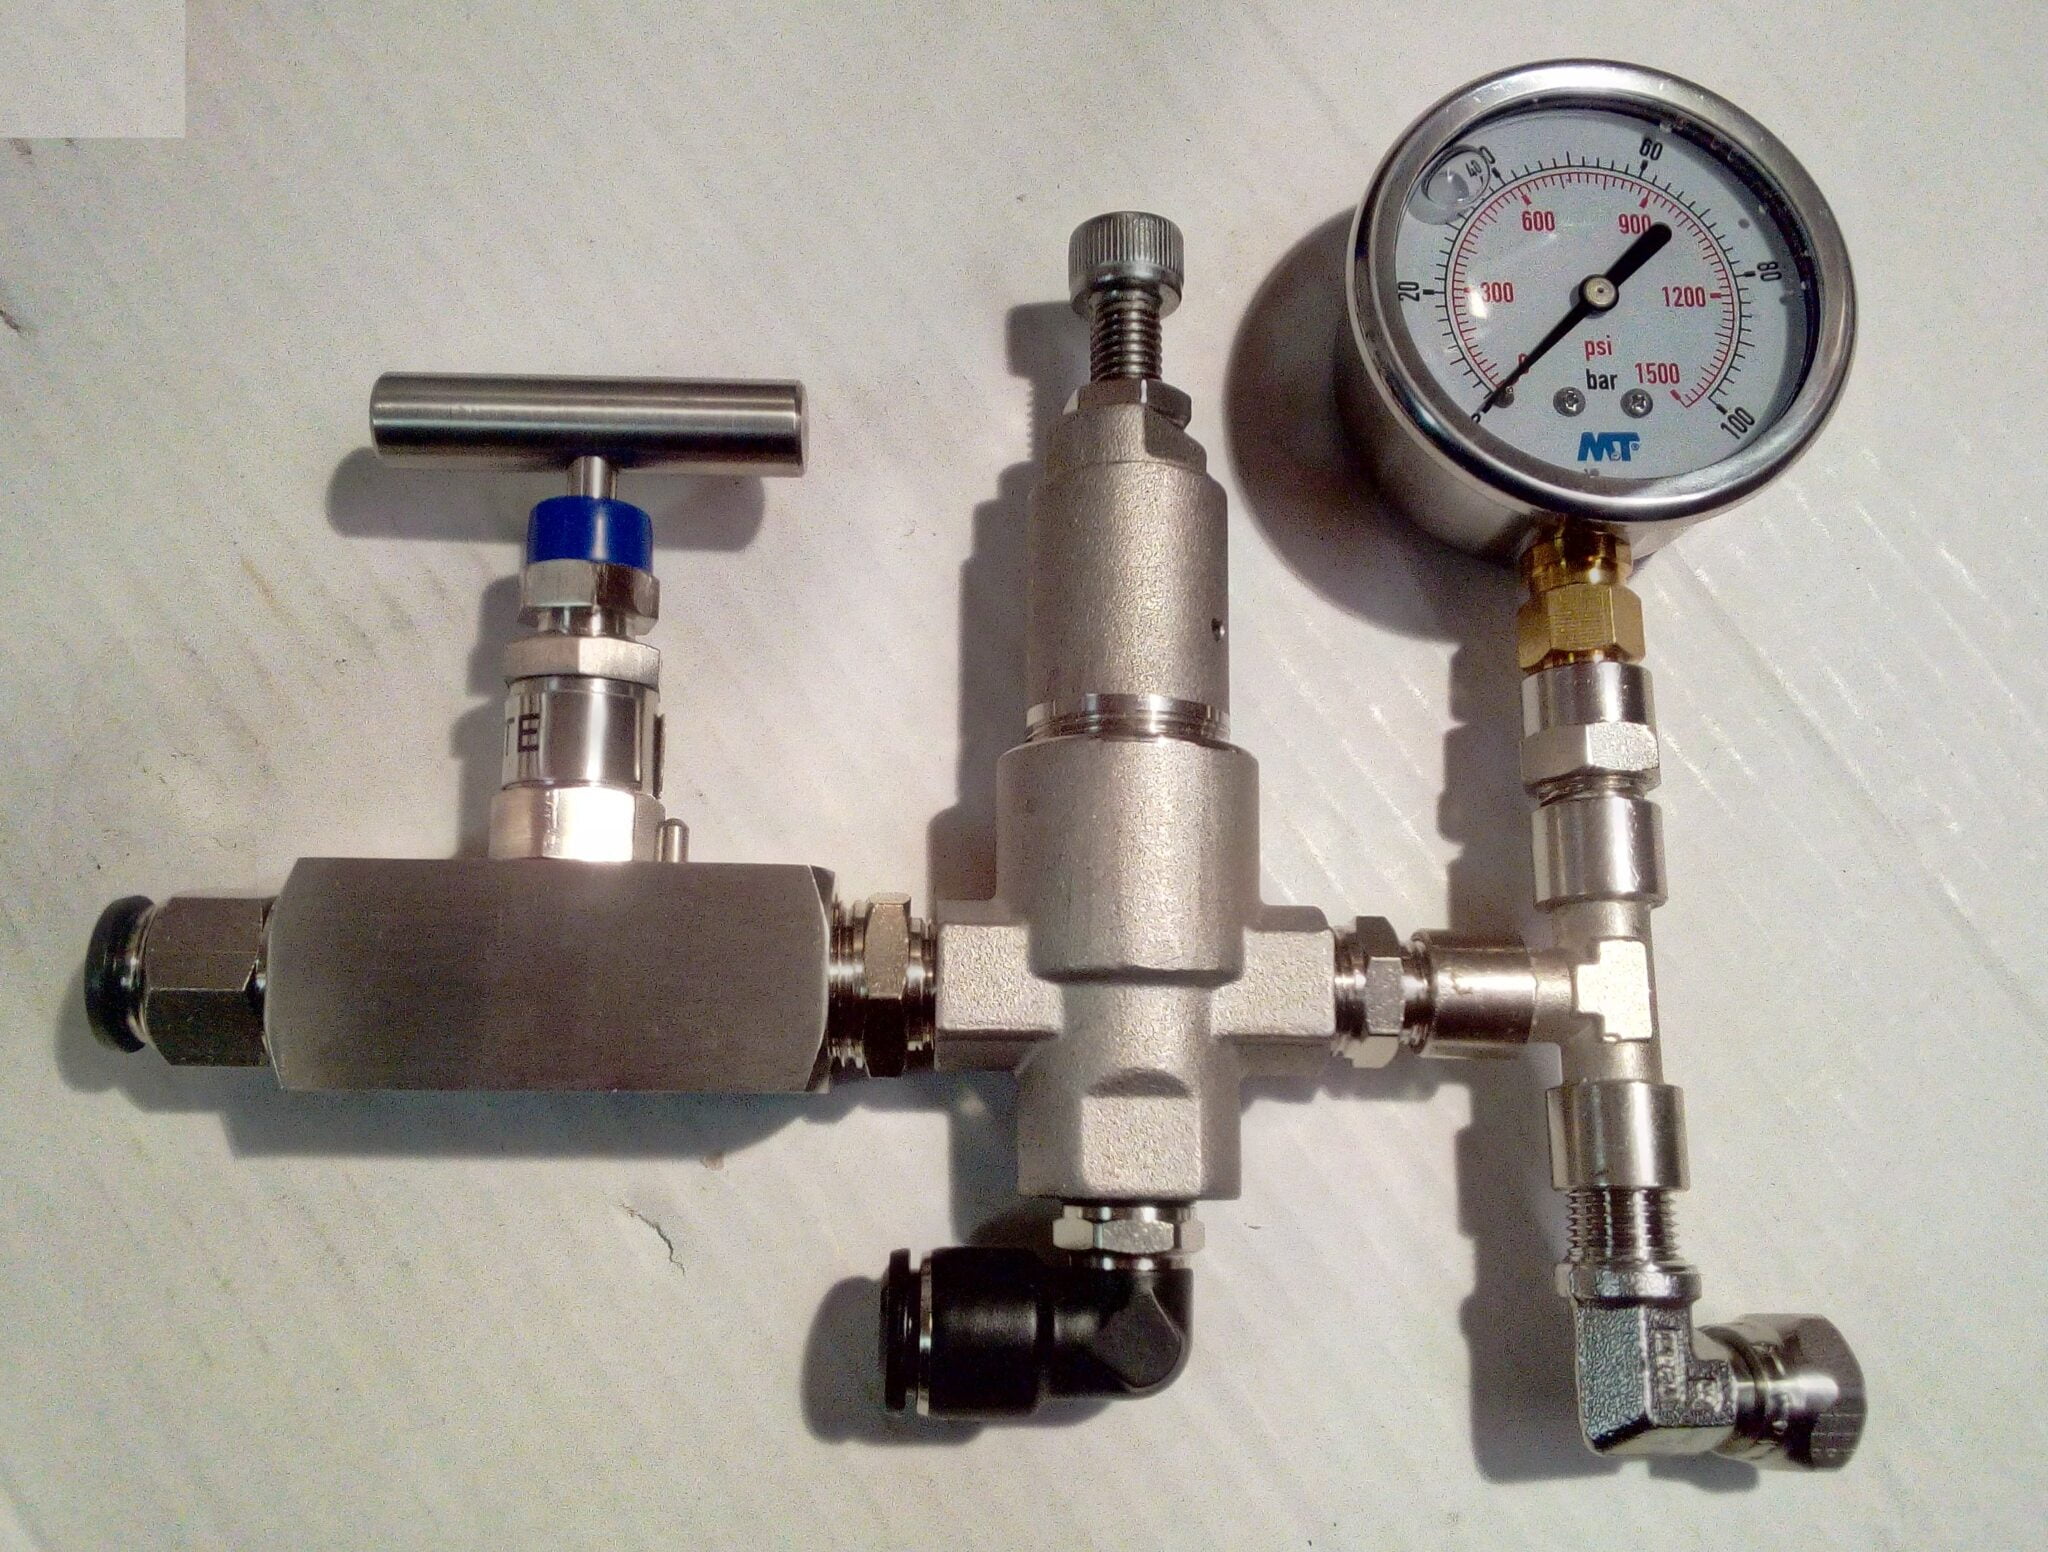 high%20pressure%20regulation%20assembly%20for%20watermaker%20right%20version - High Pressure Regulation Assembly with 63 mm. diam. Gauge